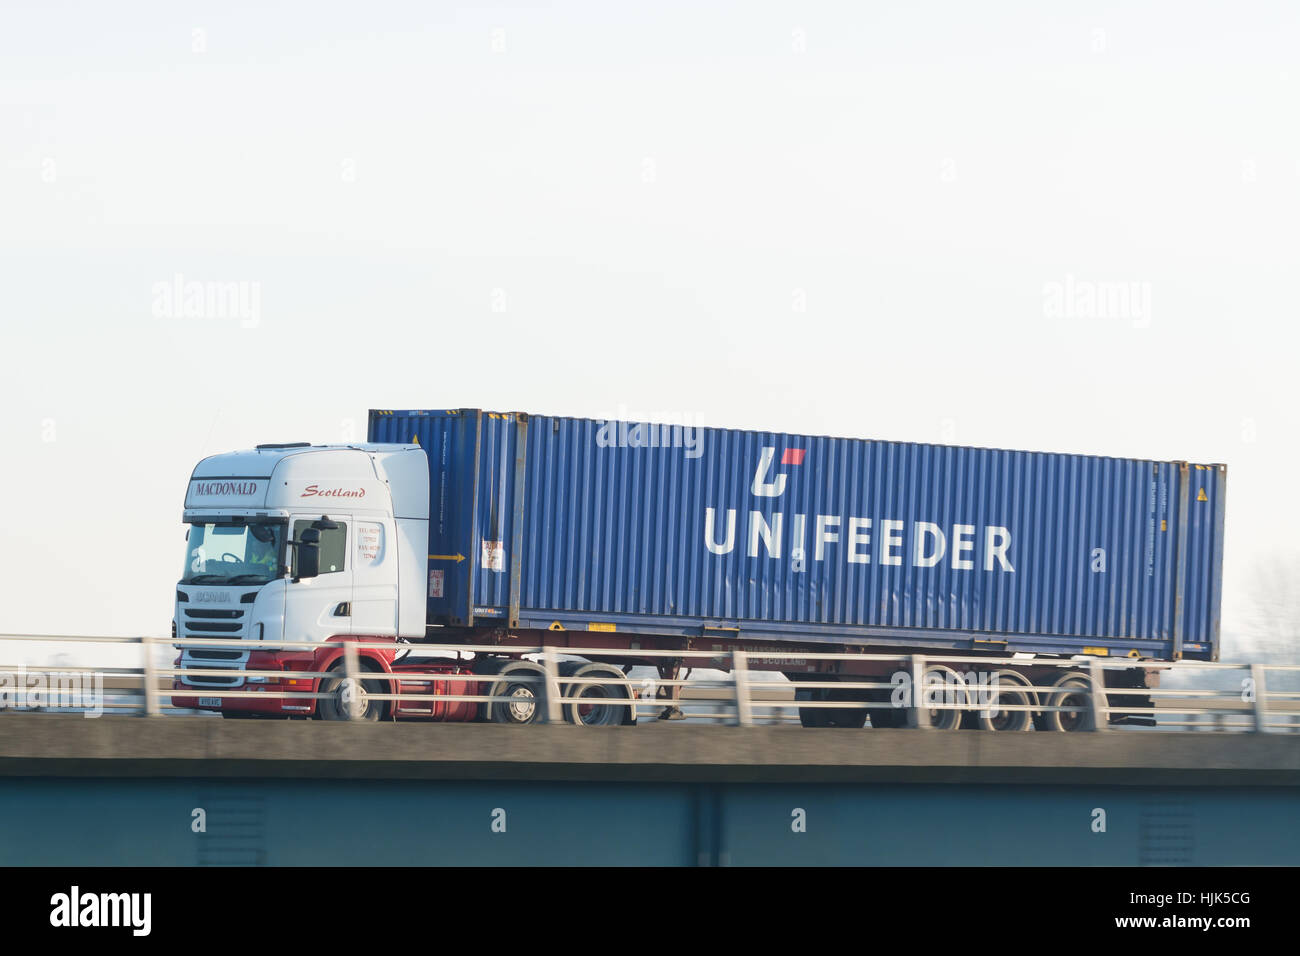 Unifeeder shipping container on lorry - Scotland, UK Stock Photo